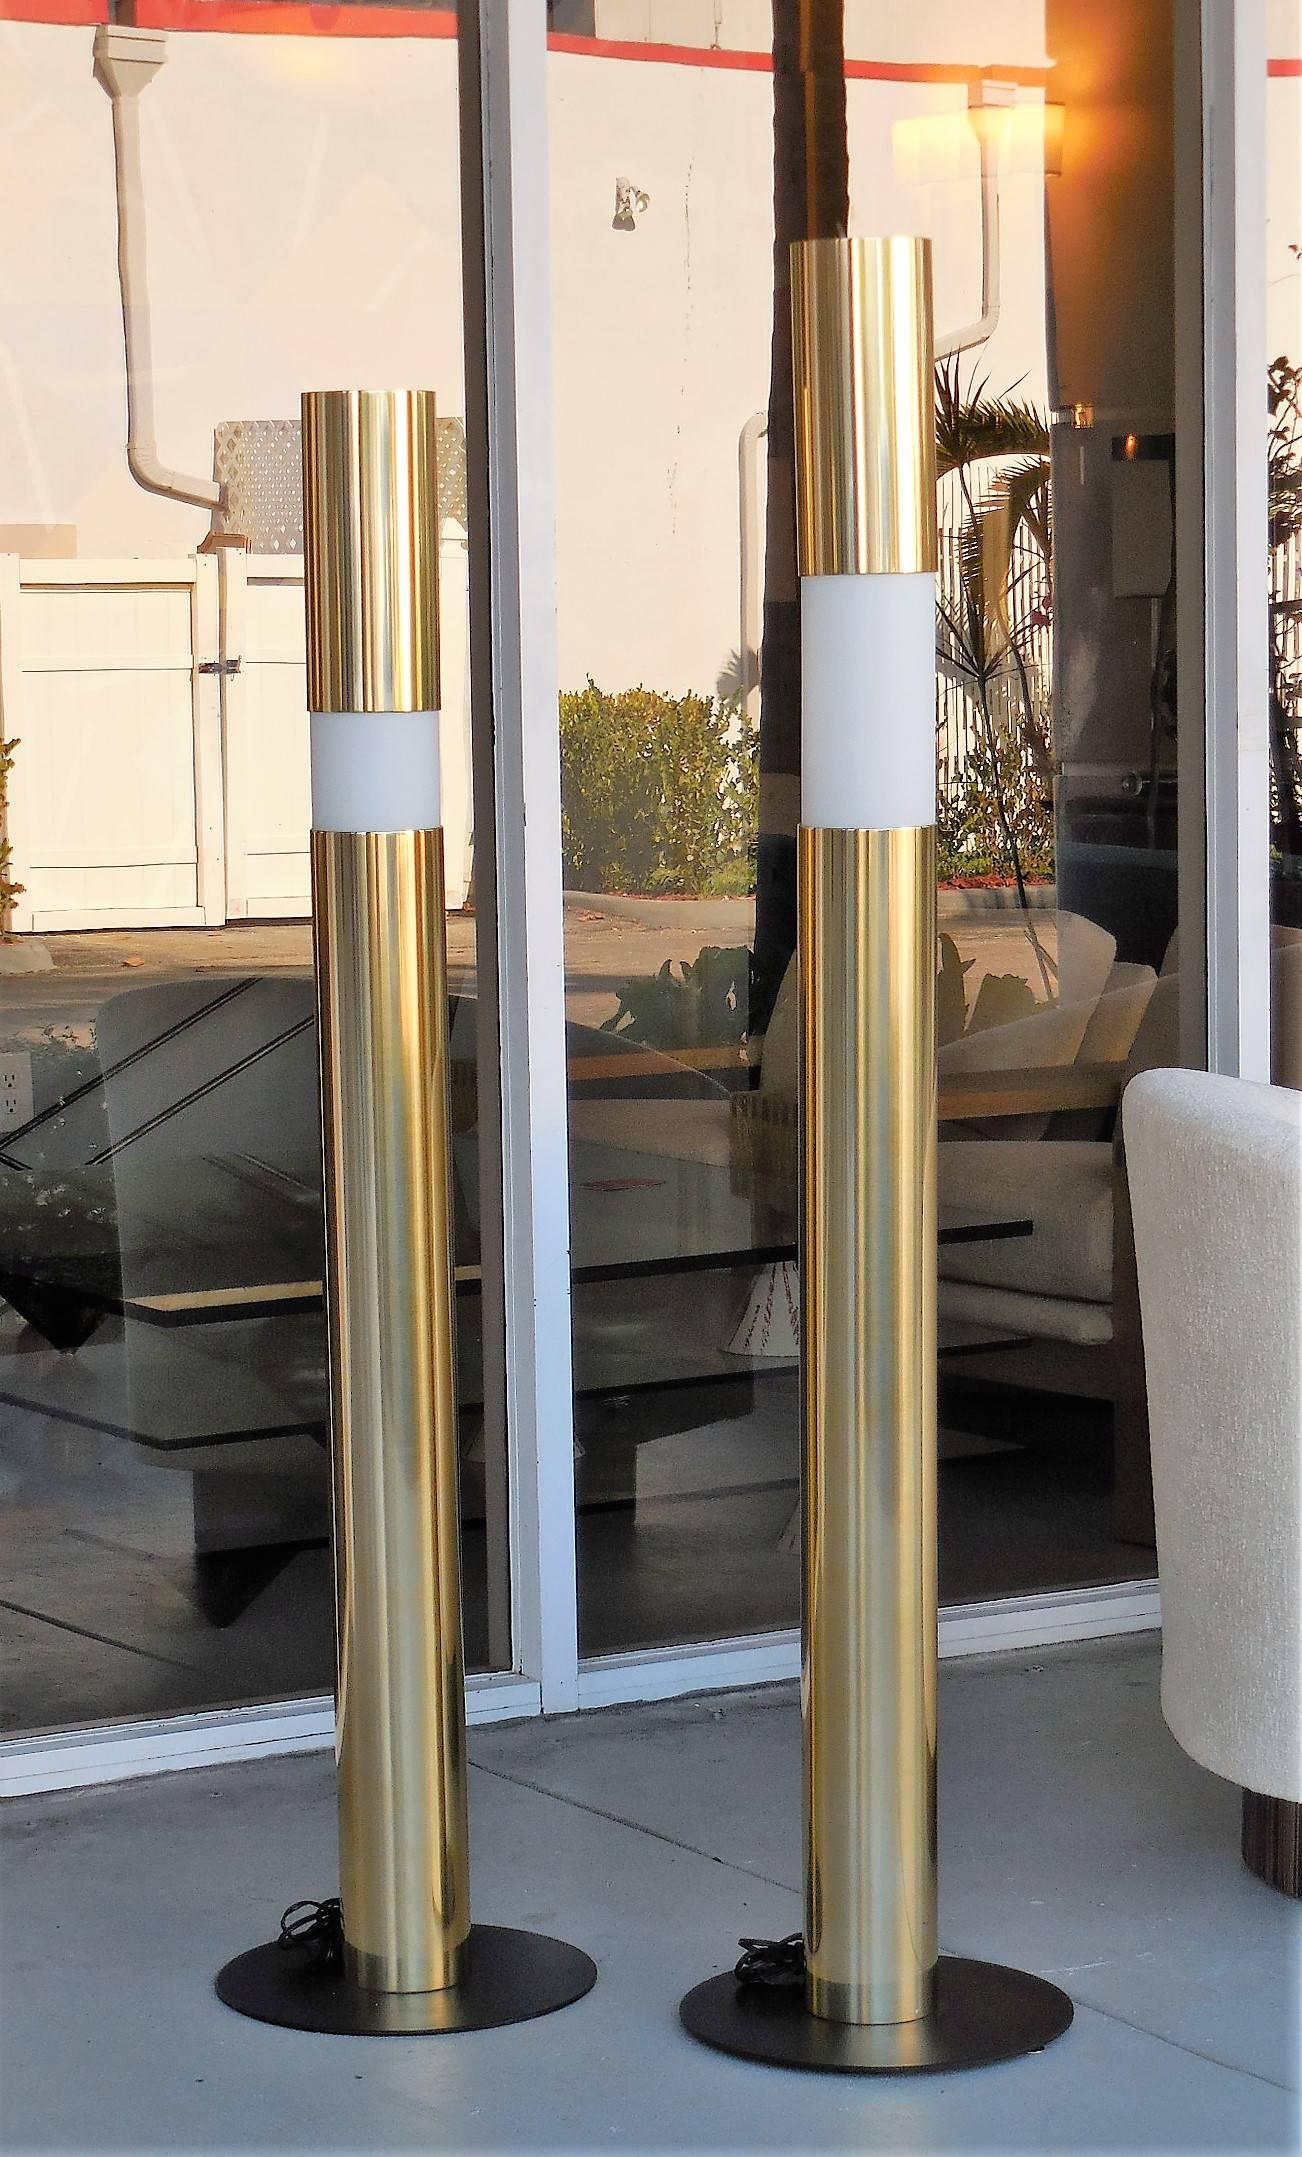 Pair of modernist floor lamps. Cylindrical shape with glass diffusers. The top metal piece moves up and down. Light also comes out at the top. Glass retain 